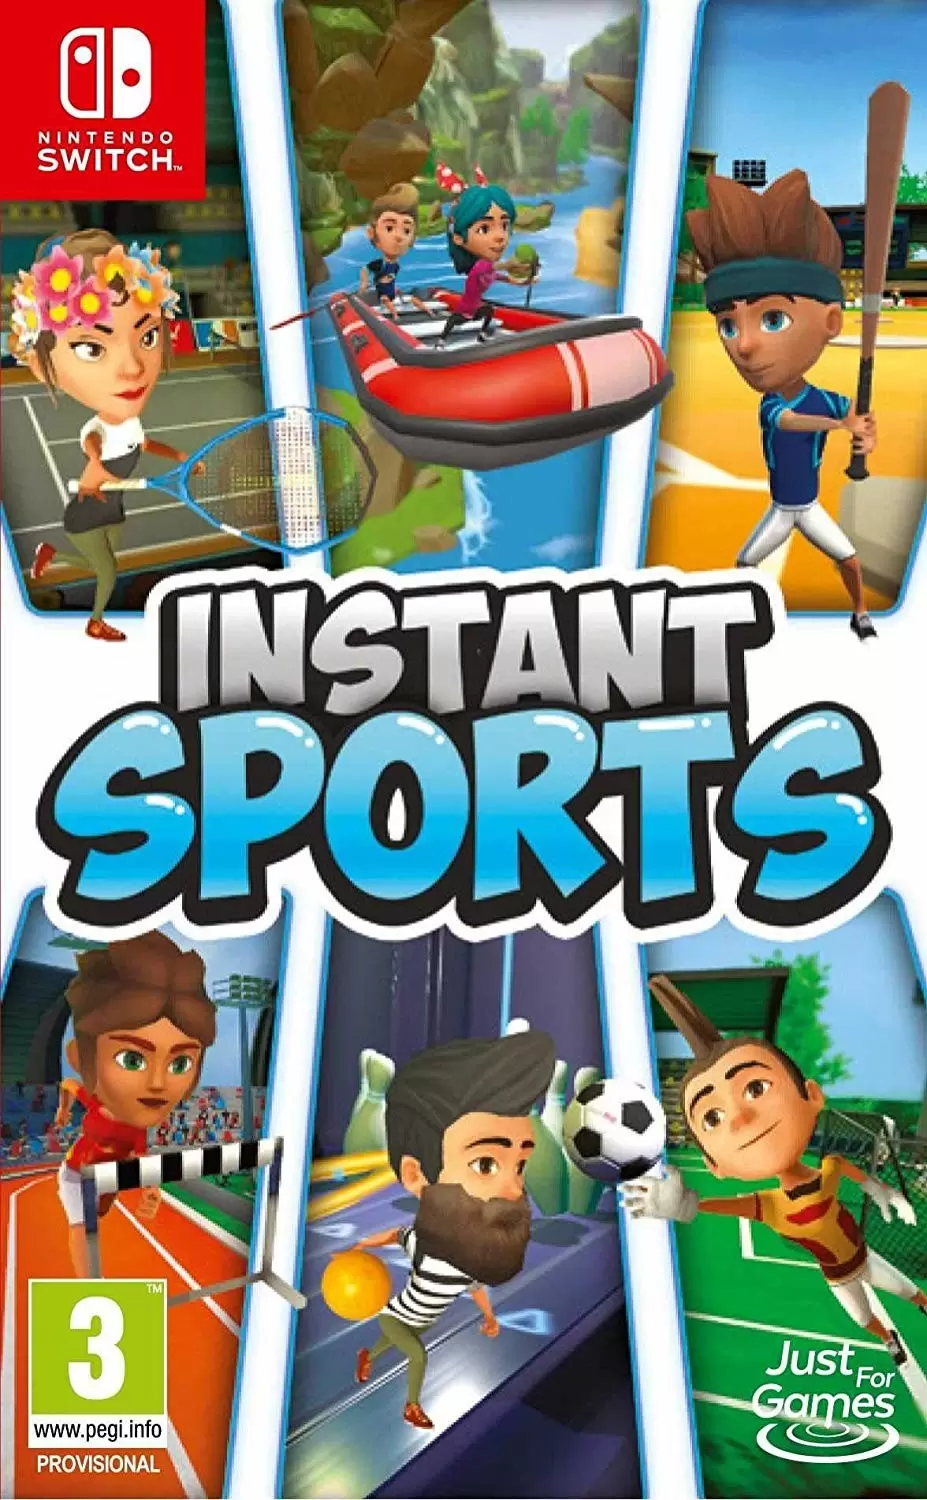 Nintendo Switch Games - Instant Sports